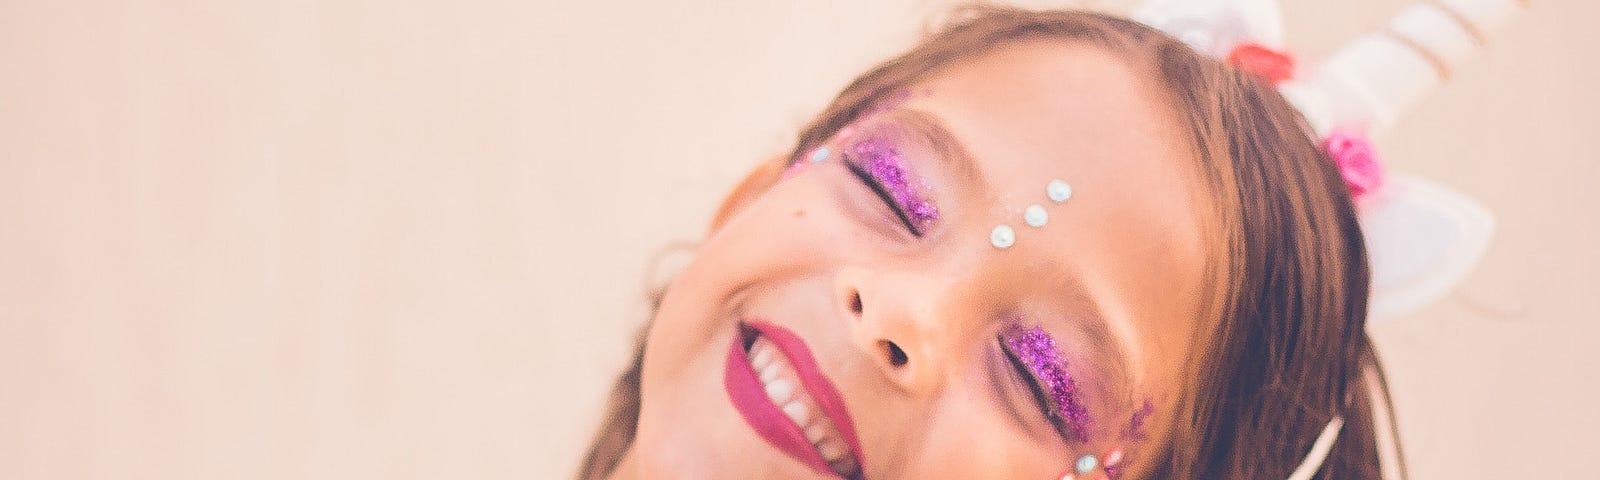 A happy girl wears a unicorn horn headband, glittery purple eye shadow, and bright pink lipstick. She is also wearing face gems and a pink T-shirt with a unicorn motif.